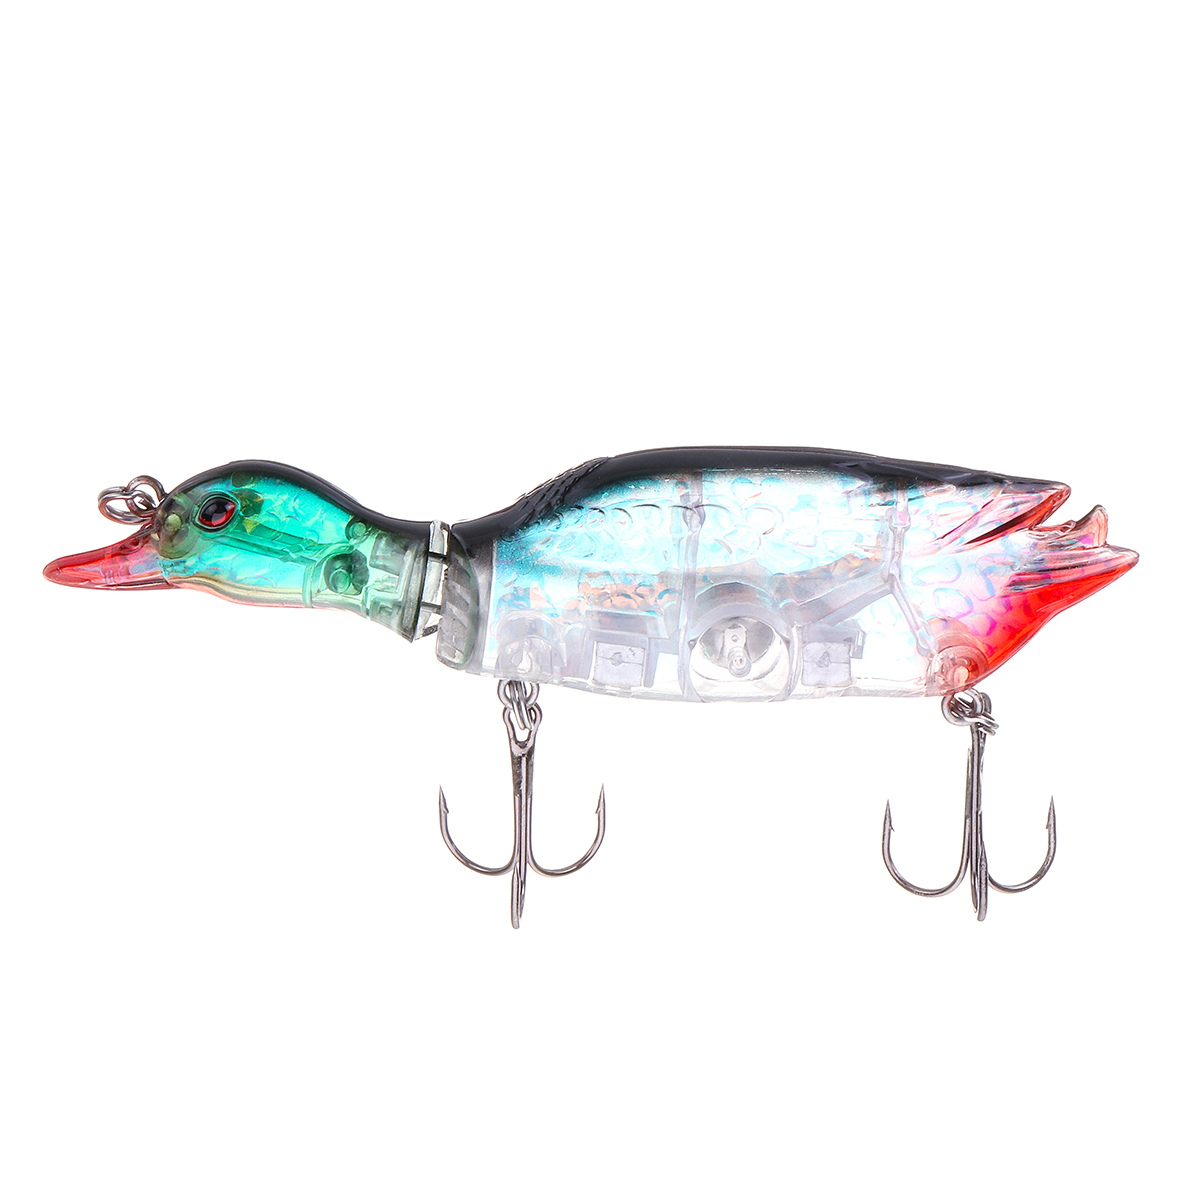 1PC-ZANLURE-5-13CM-59g-3D-Duck-Artificial-Fishing-Lure-With-Hooks--Hard-Baits-Minnow-Topwater-Wobble-1646056-10